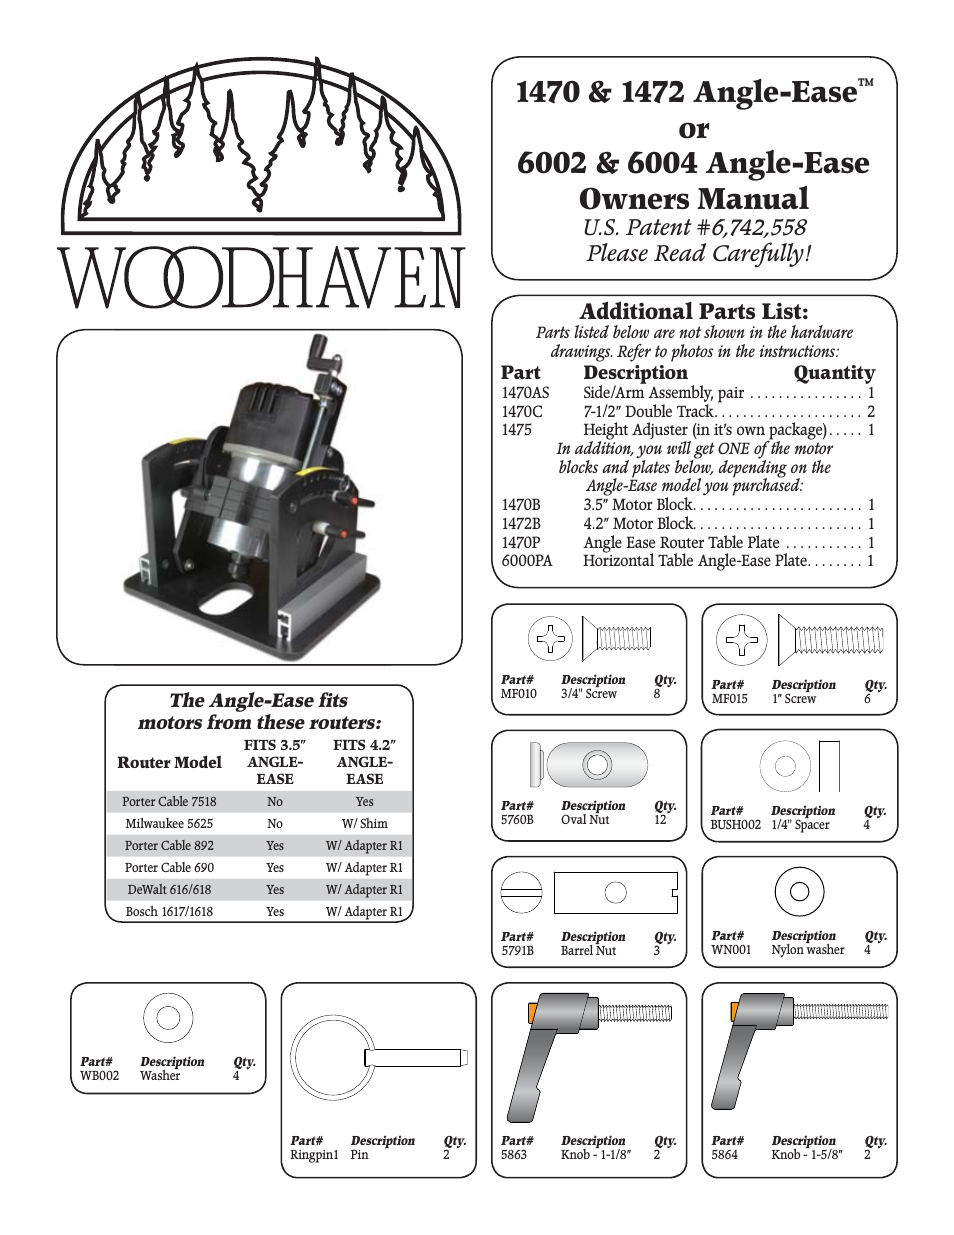 1470: Angle Ease for 3.5 Inch Router